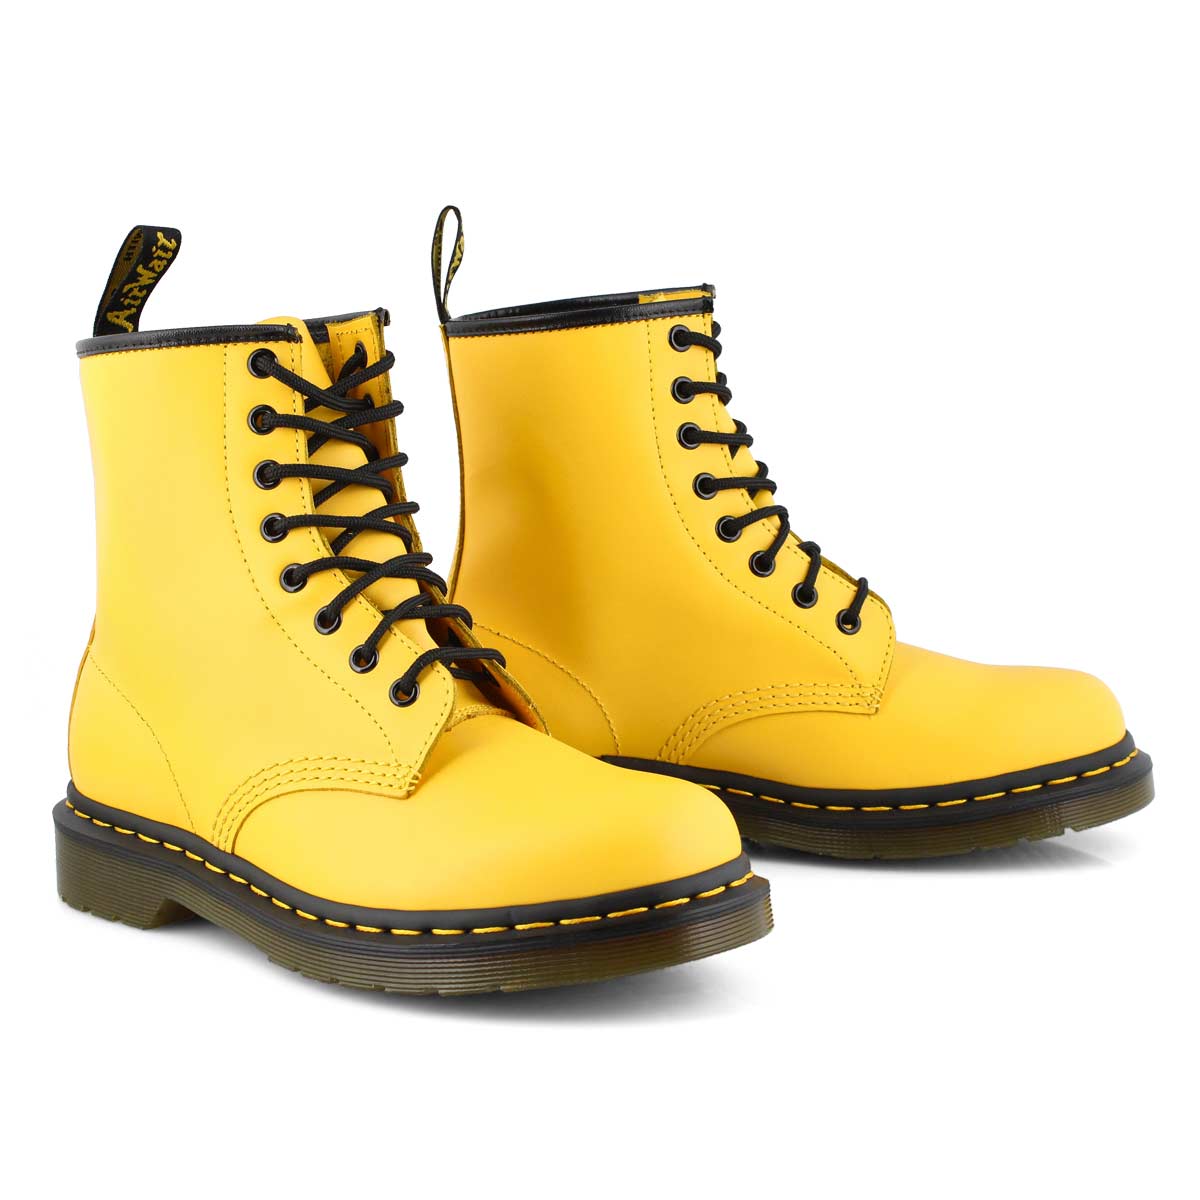 Women's 1460 8 Eye Yellow Smooth Boots